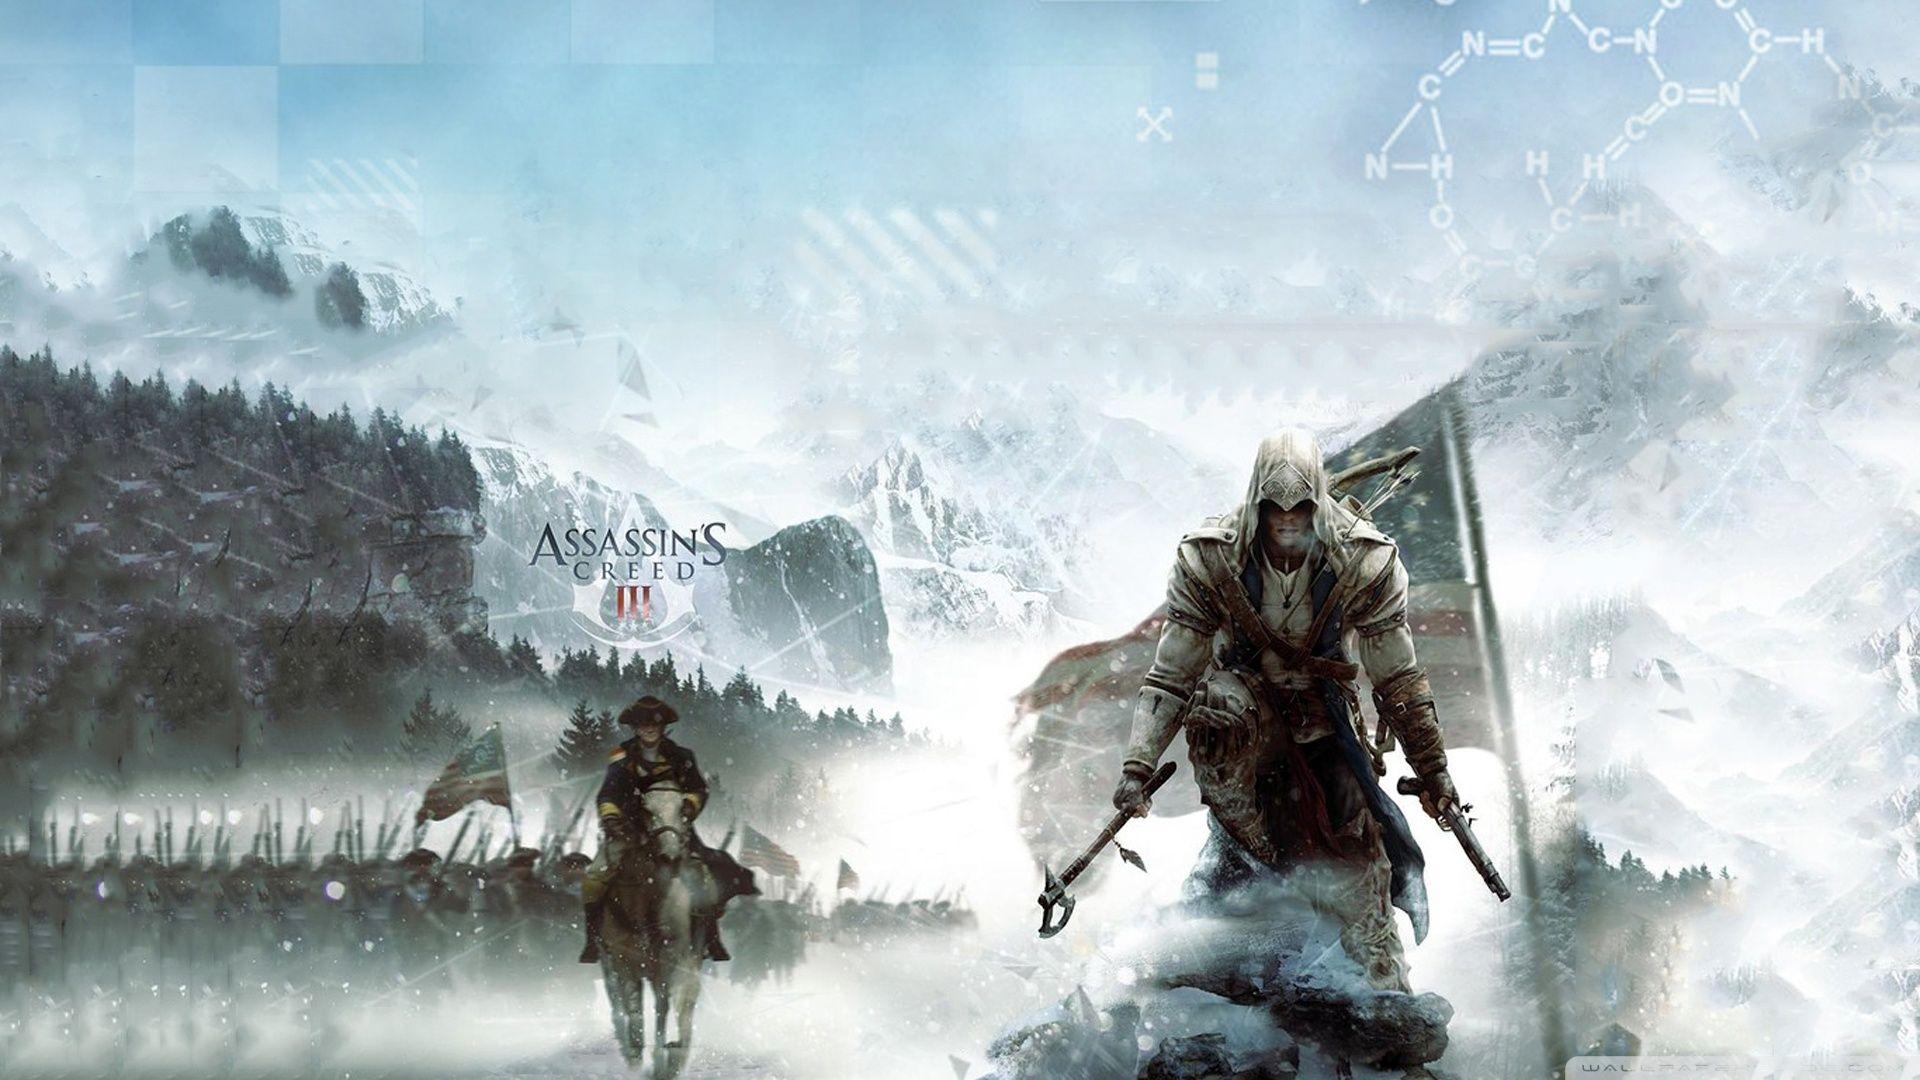 Assassin's Creed III Wallpaper, Picture, Image